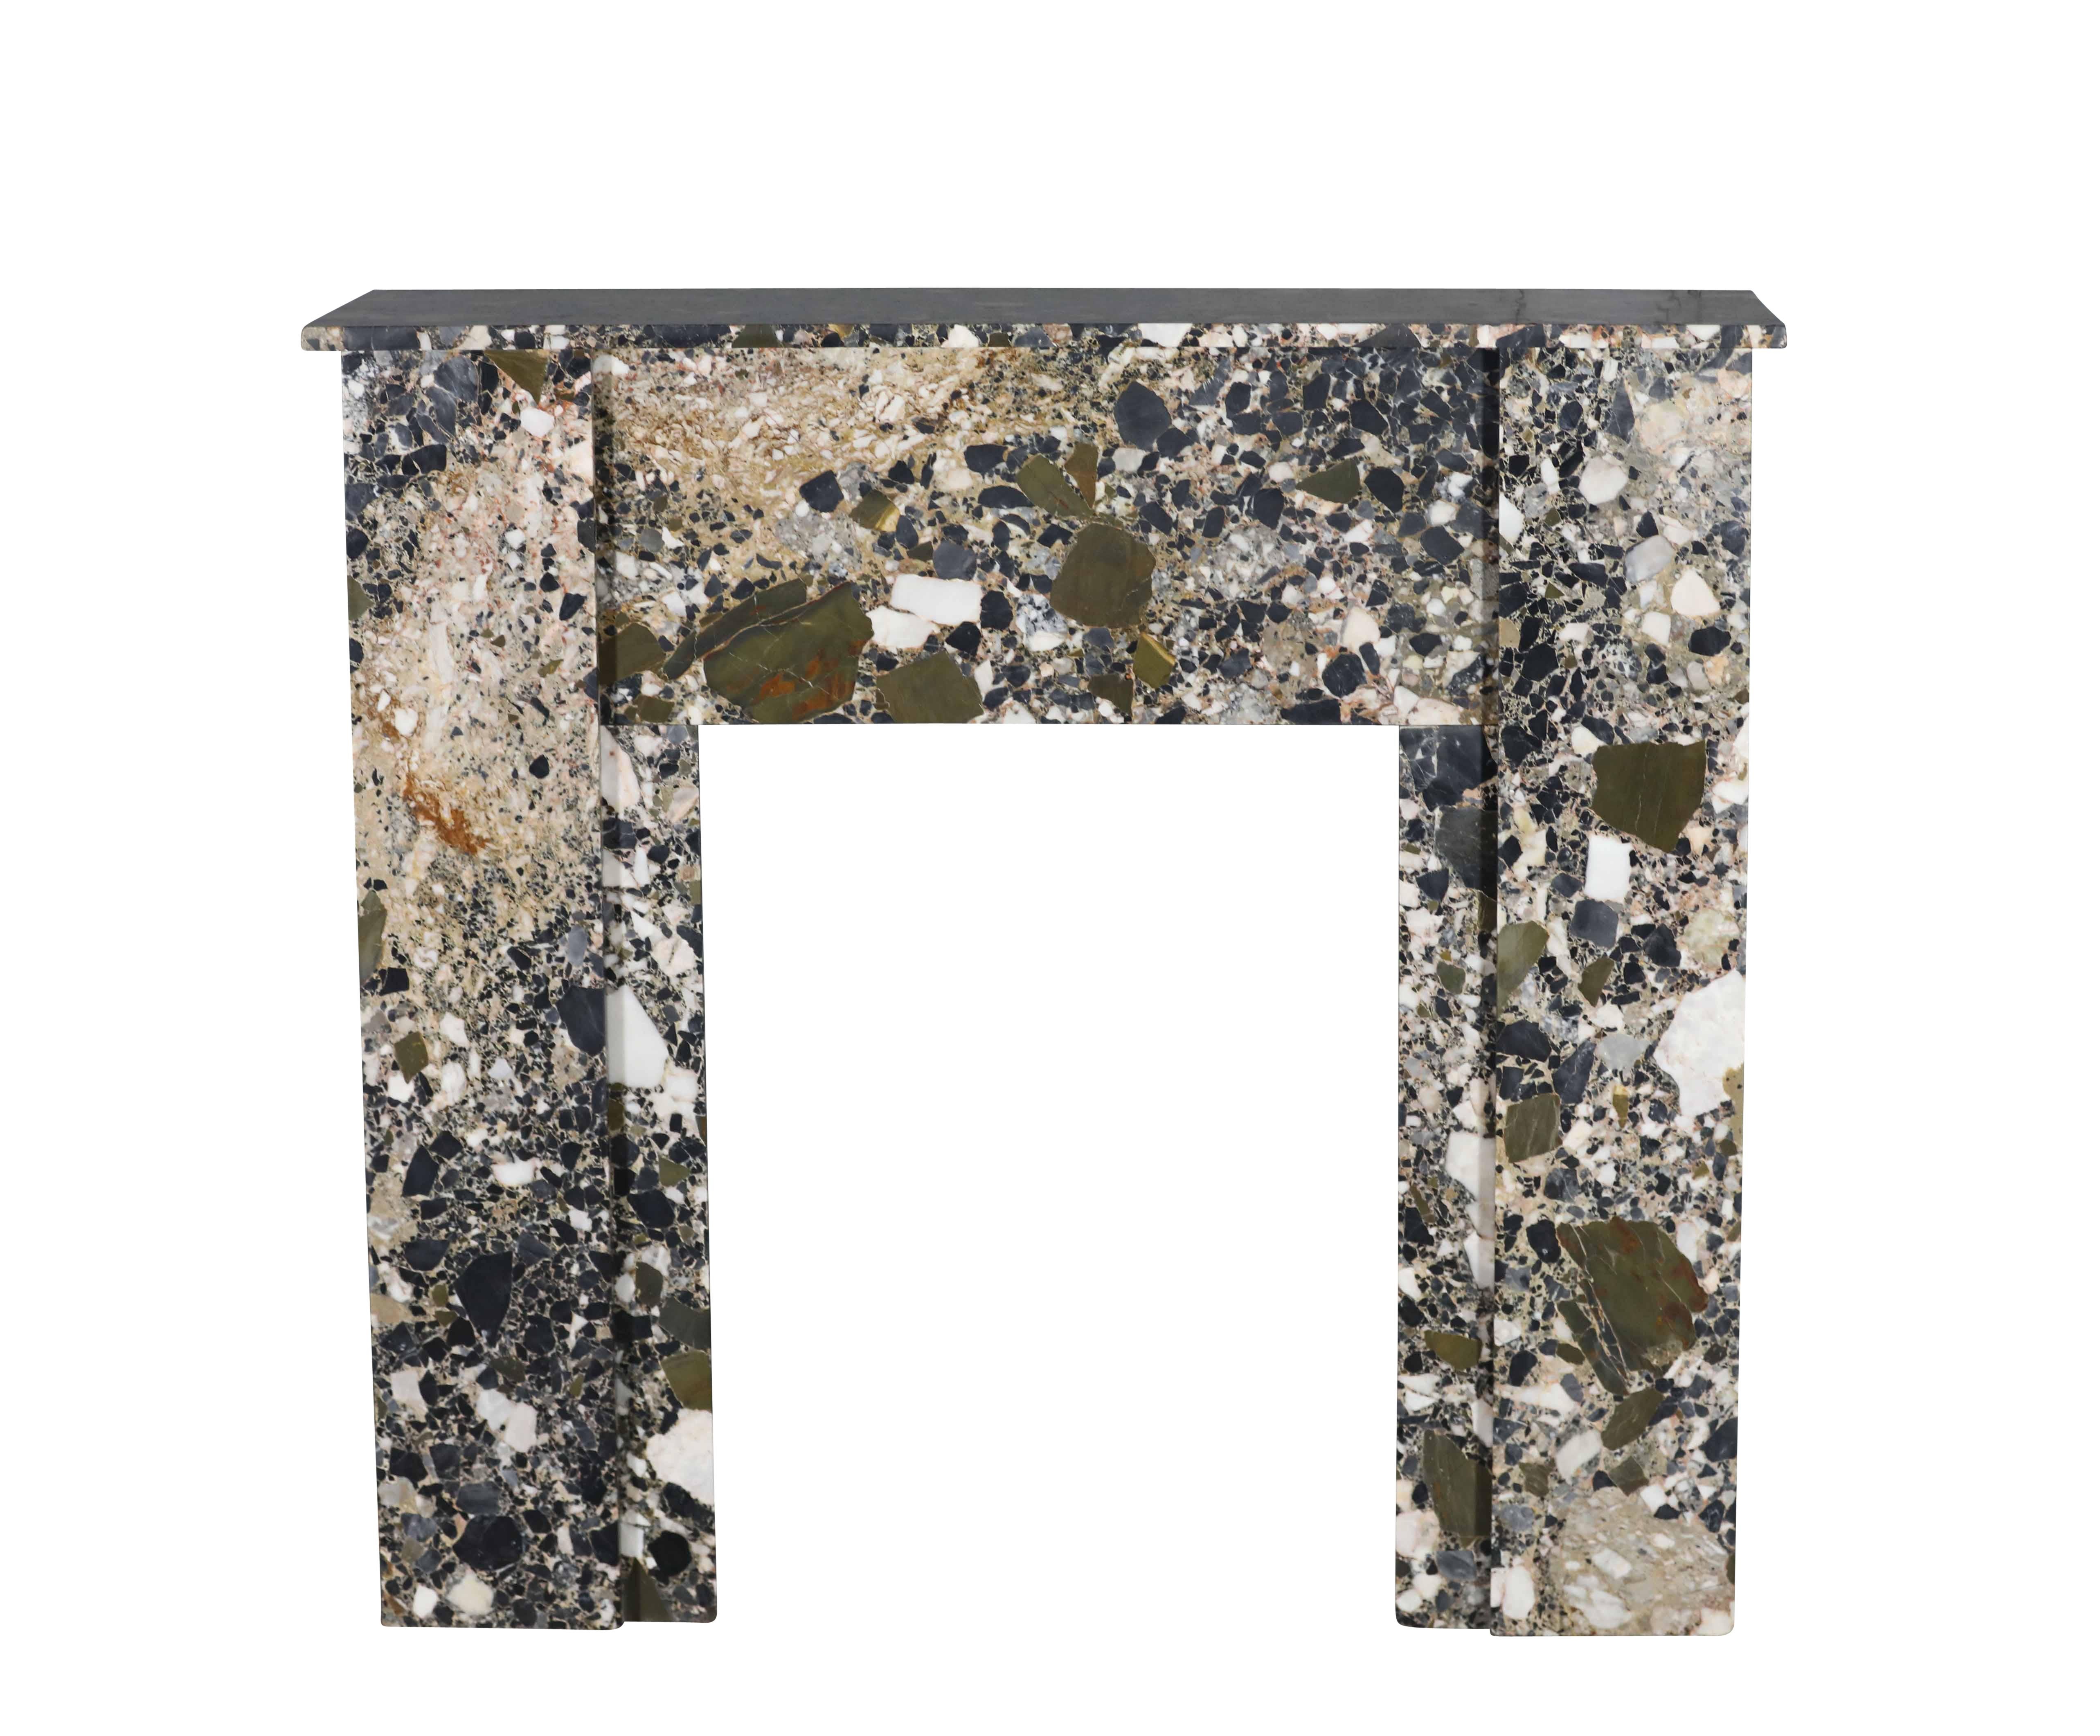 Polished Art Deco Fireplace In Breccia Marble For Minimal Chic or Cosy Interior Design  For Sale